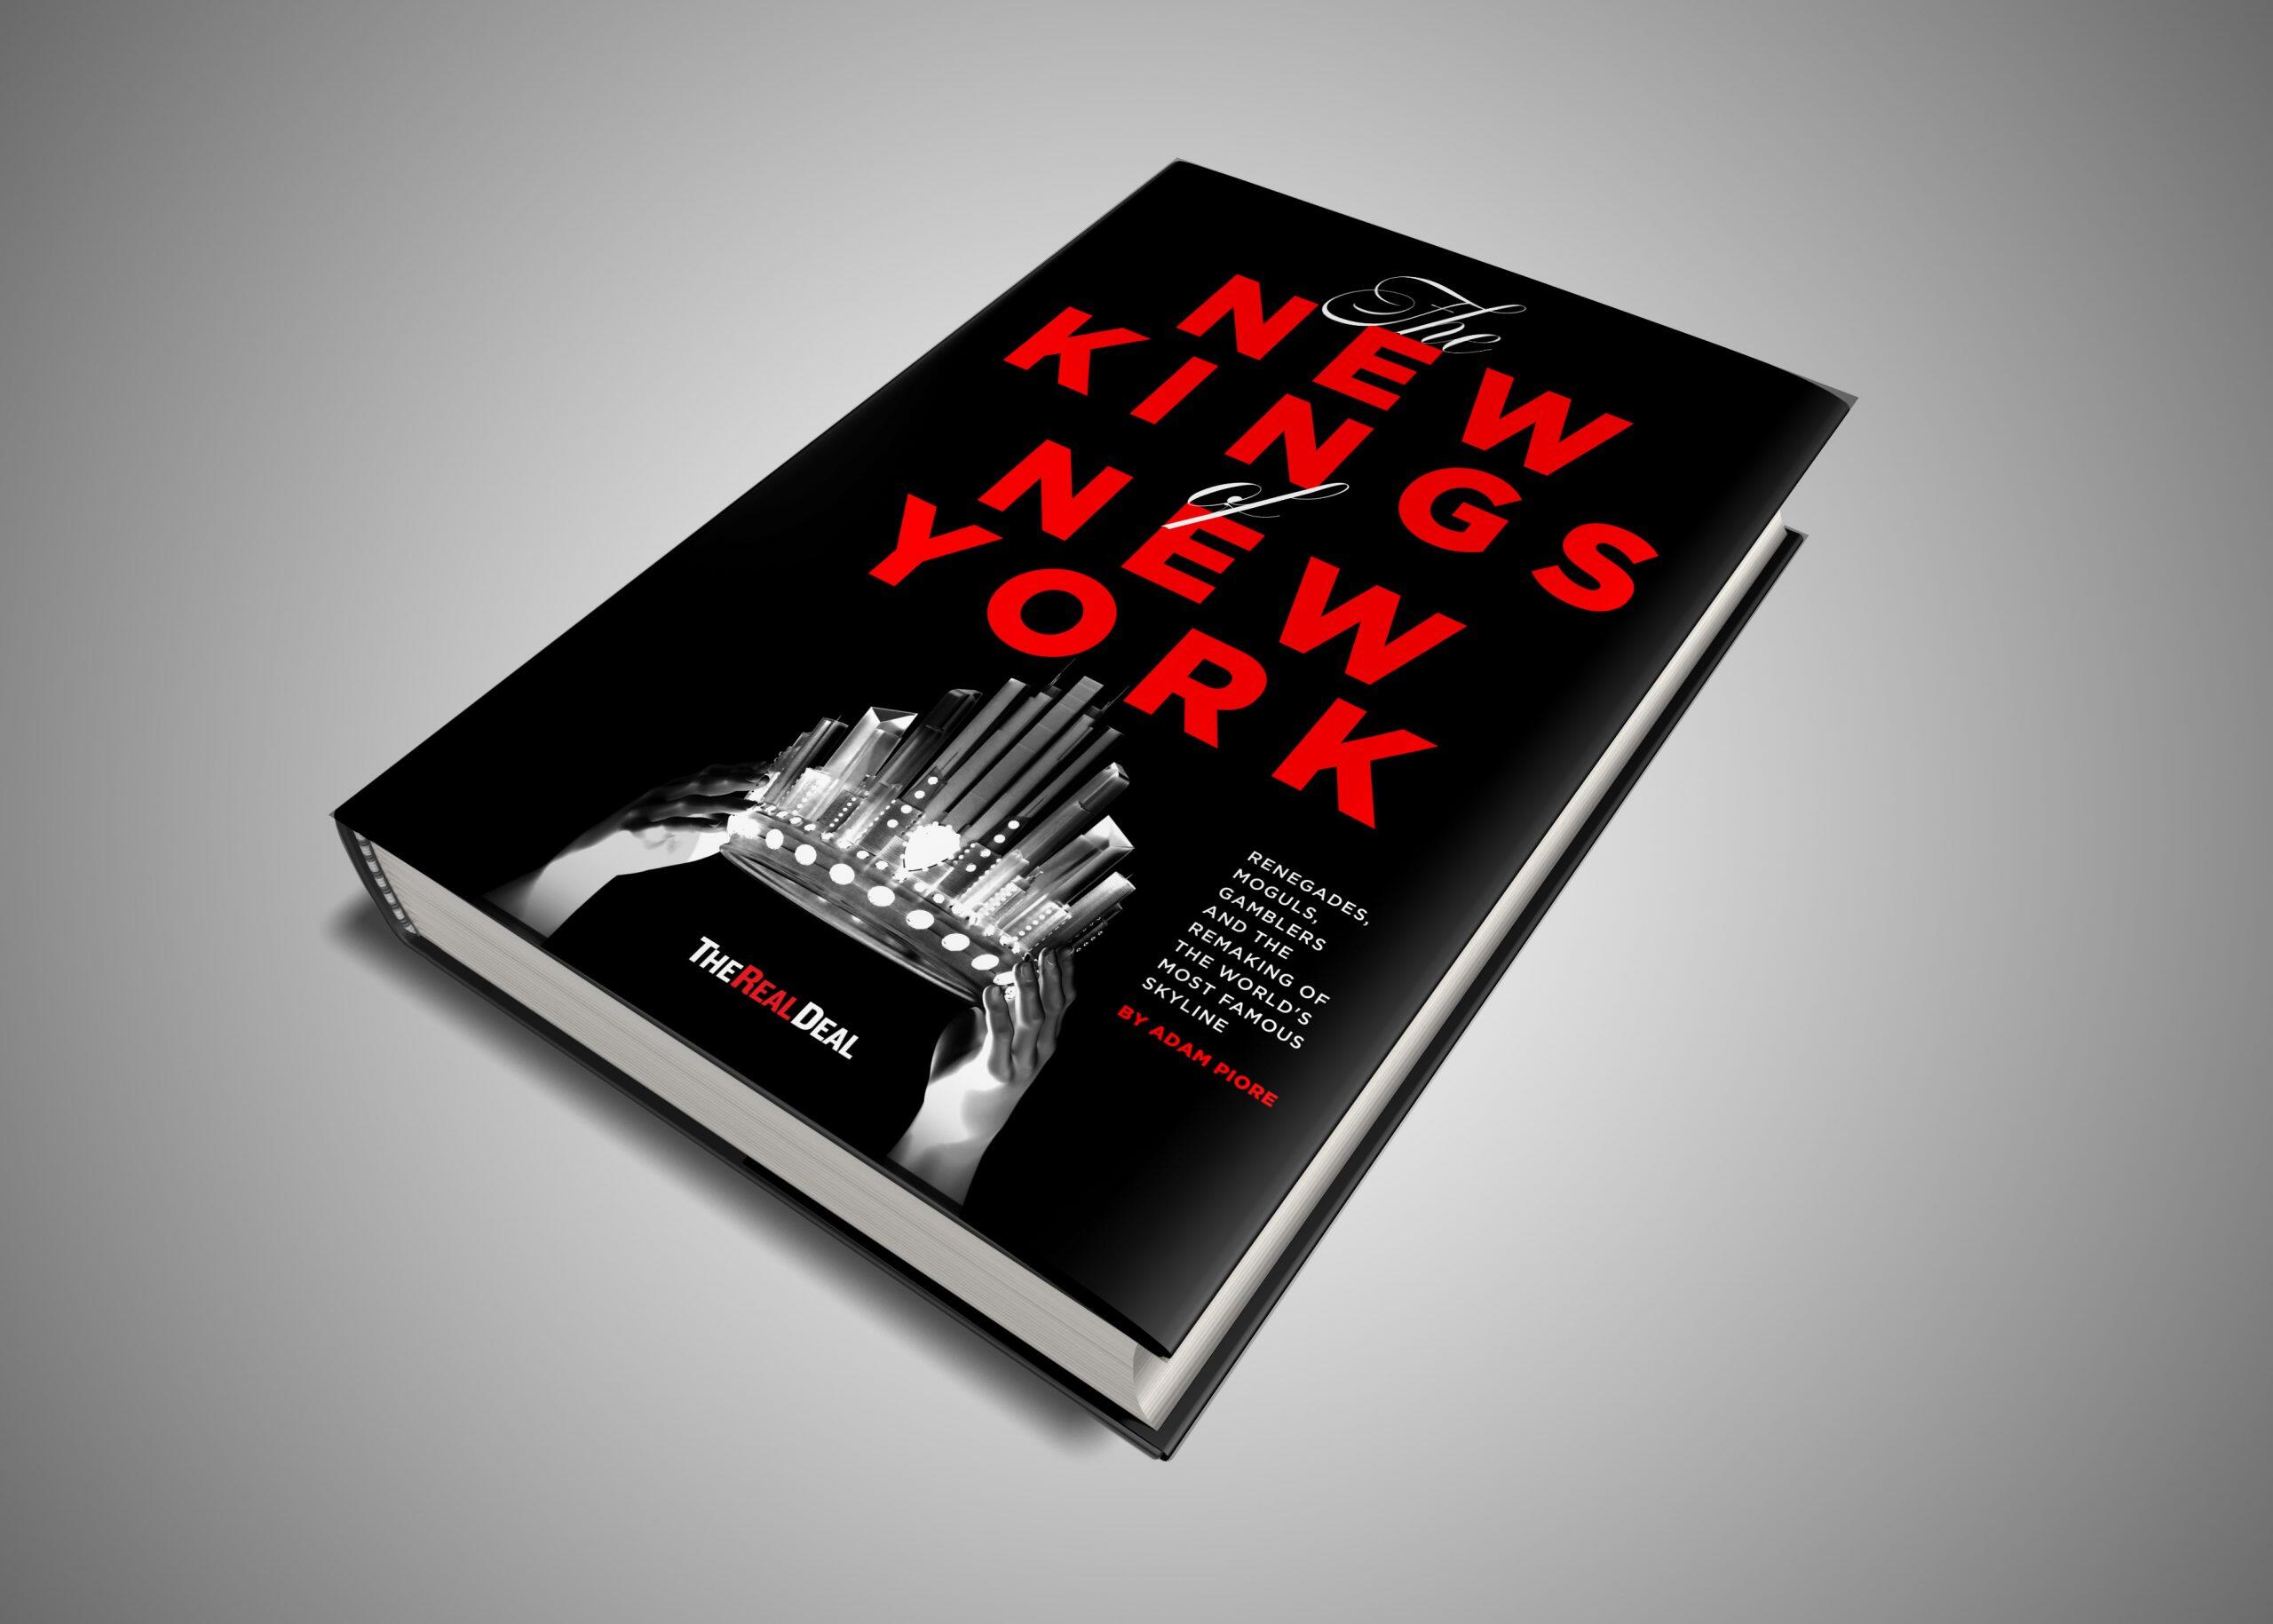 Pick up your copy of “The New Kings of New York” today